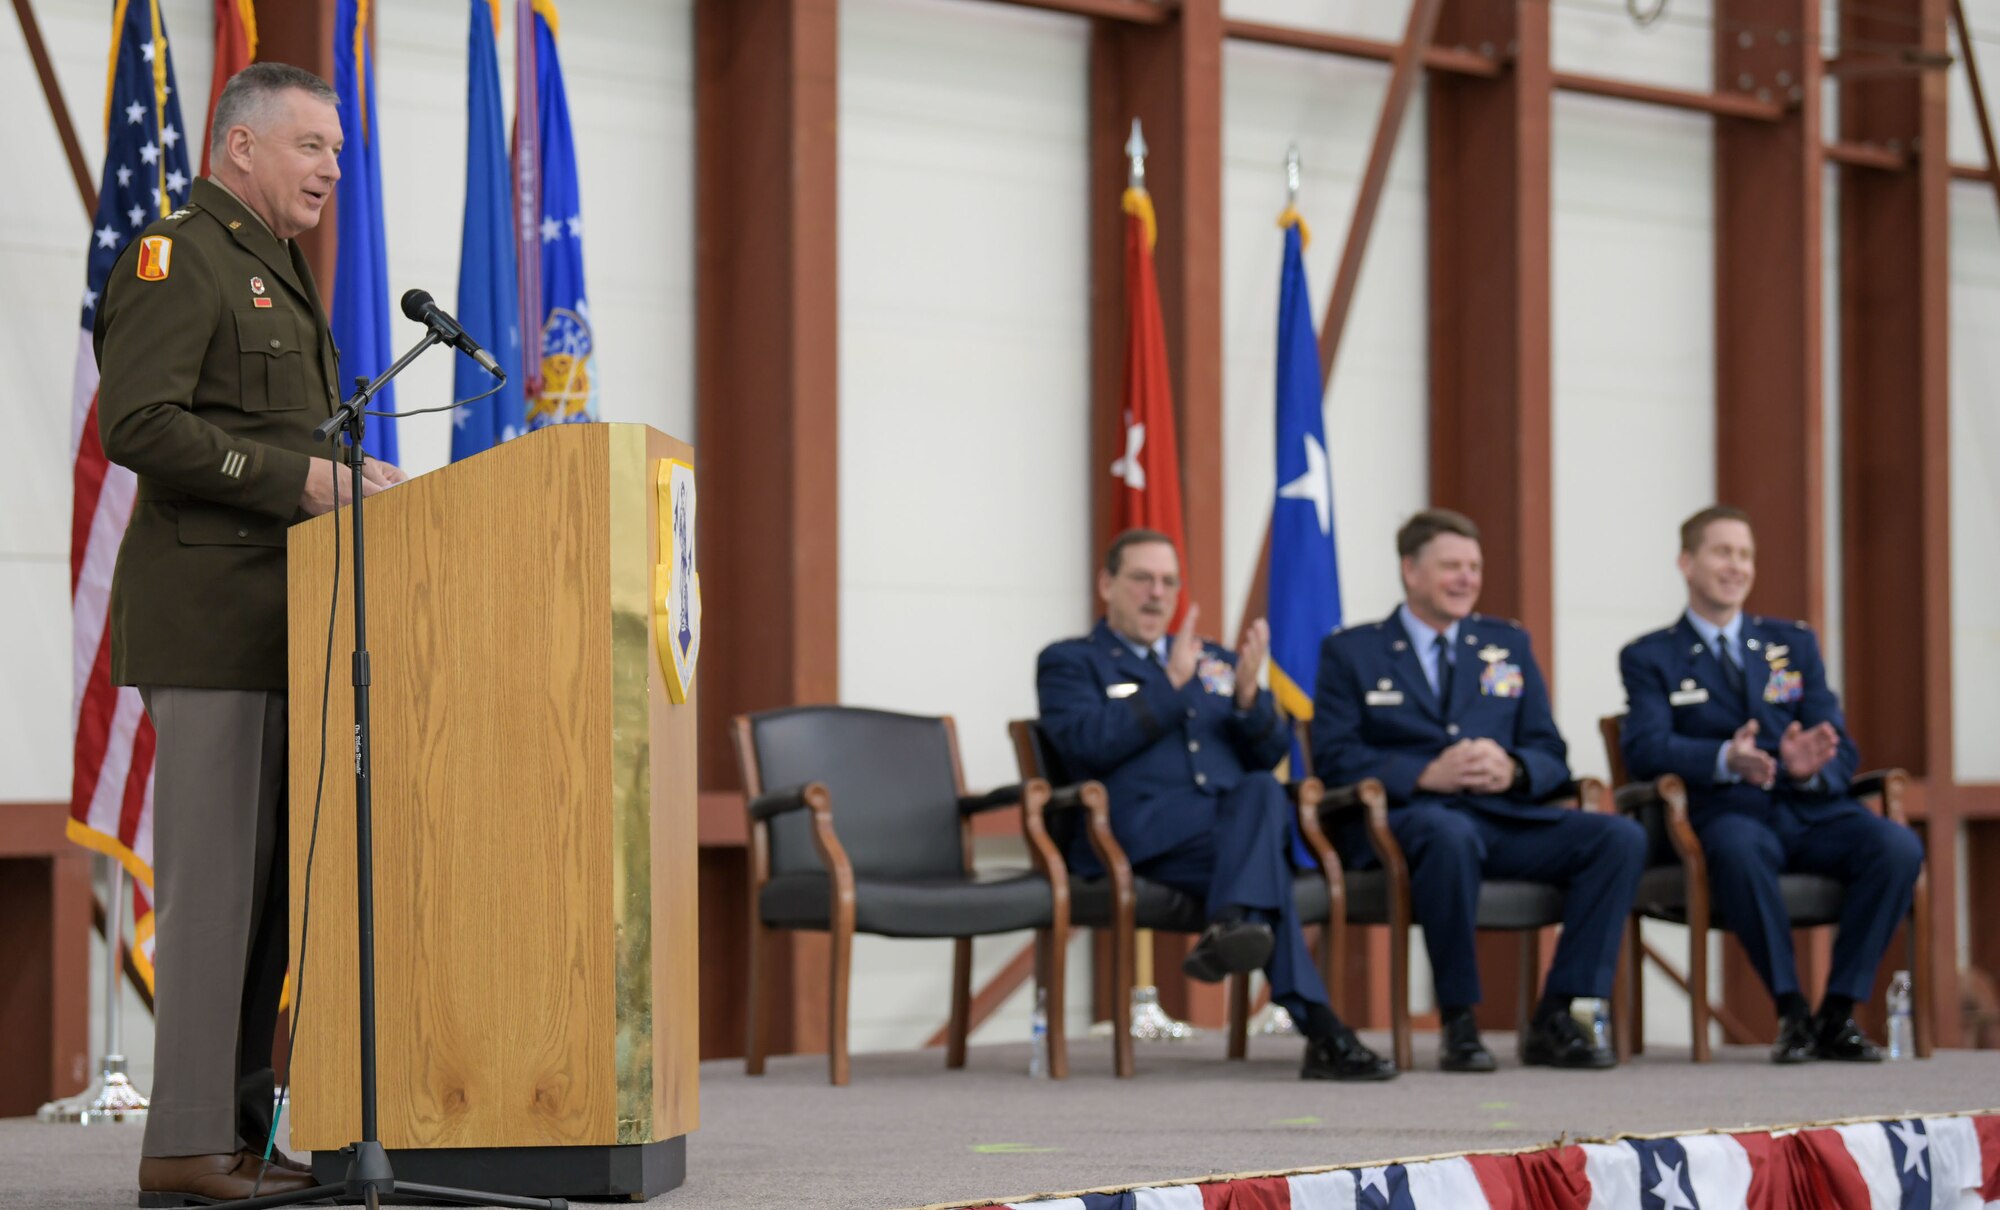 Maj. Gen. Janson D. Boyles, adjutant general of the Mississippi National Guard, hosts the change of command ceremony for the 172nd Airlift Wing at Thompson Field, Jackson, Mississippi, Feb. 6, 2022.